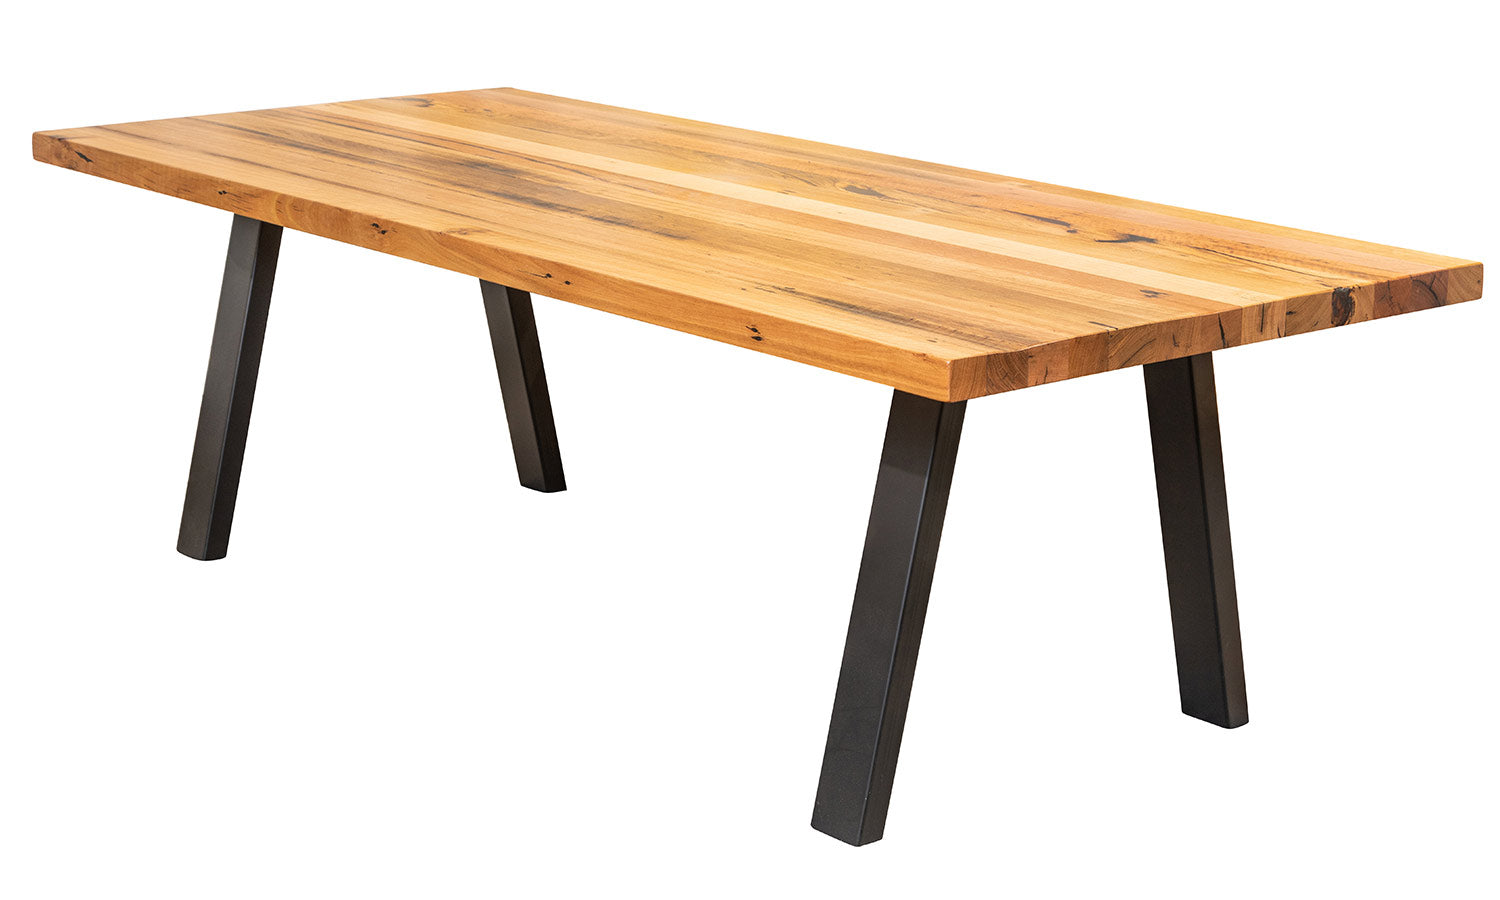 Recycled Australian Messmate Rustic Timber Dining Table metal base Perth, WA